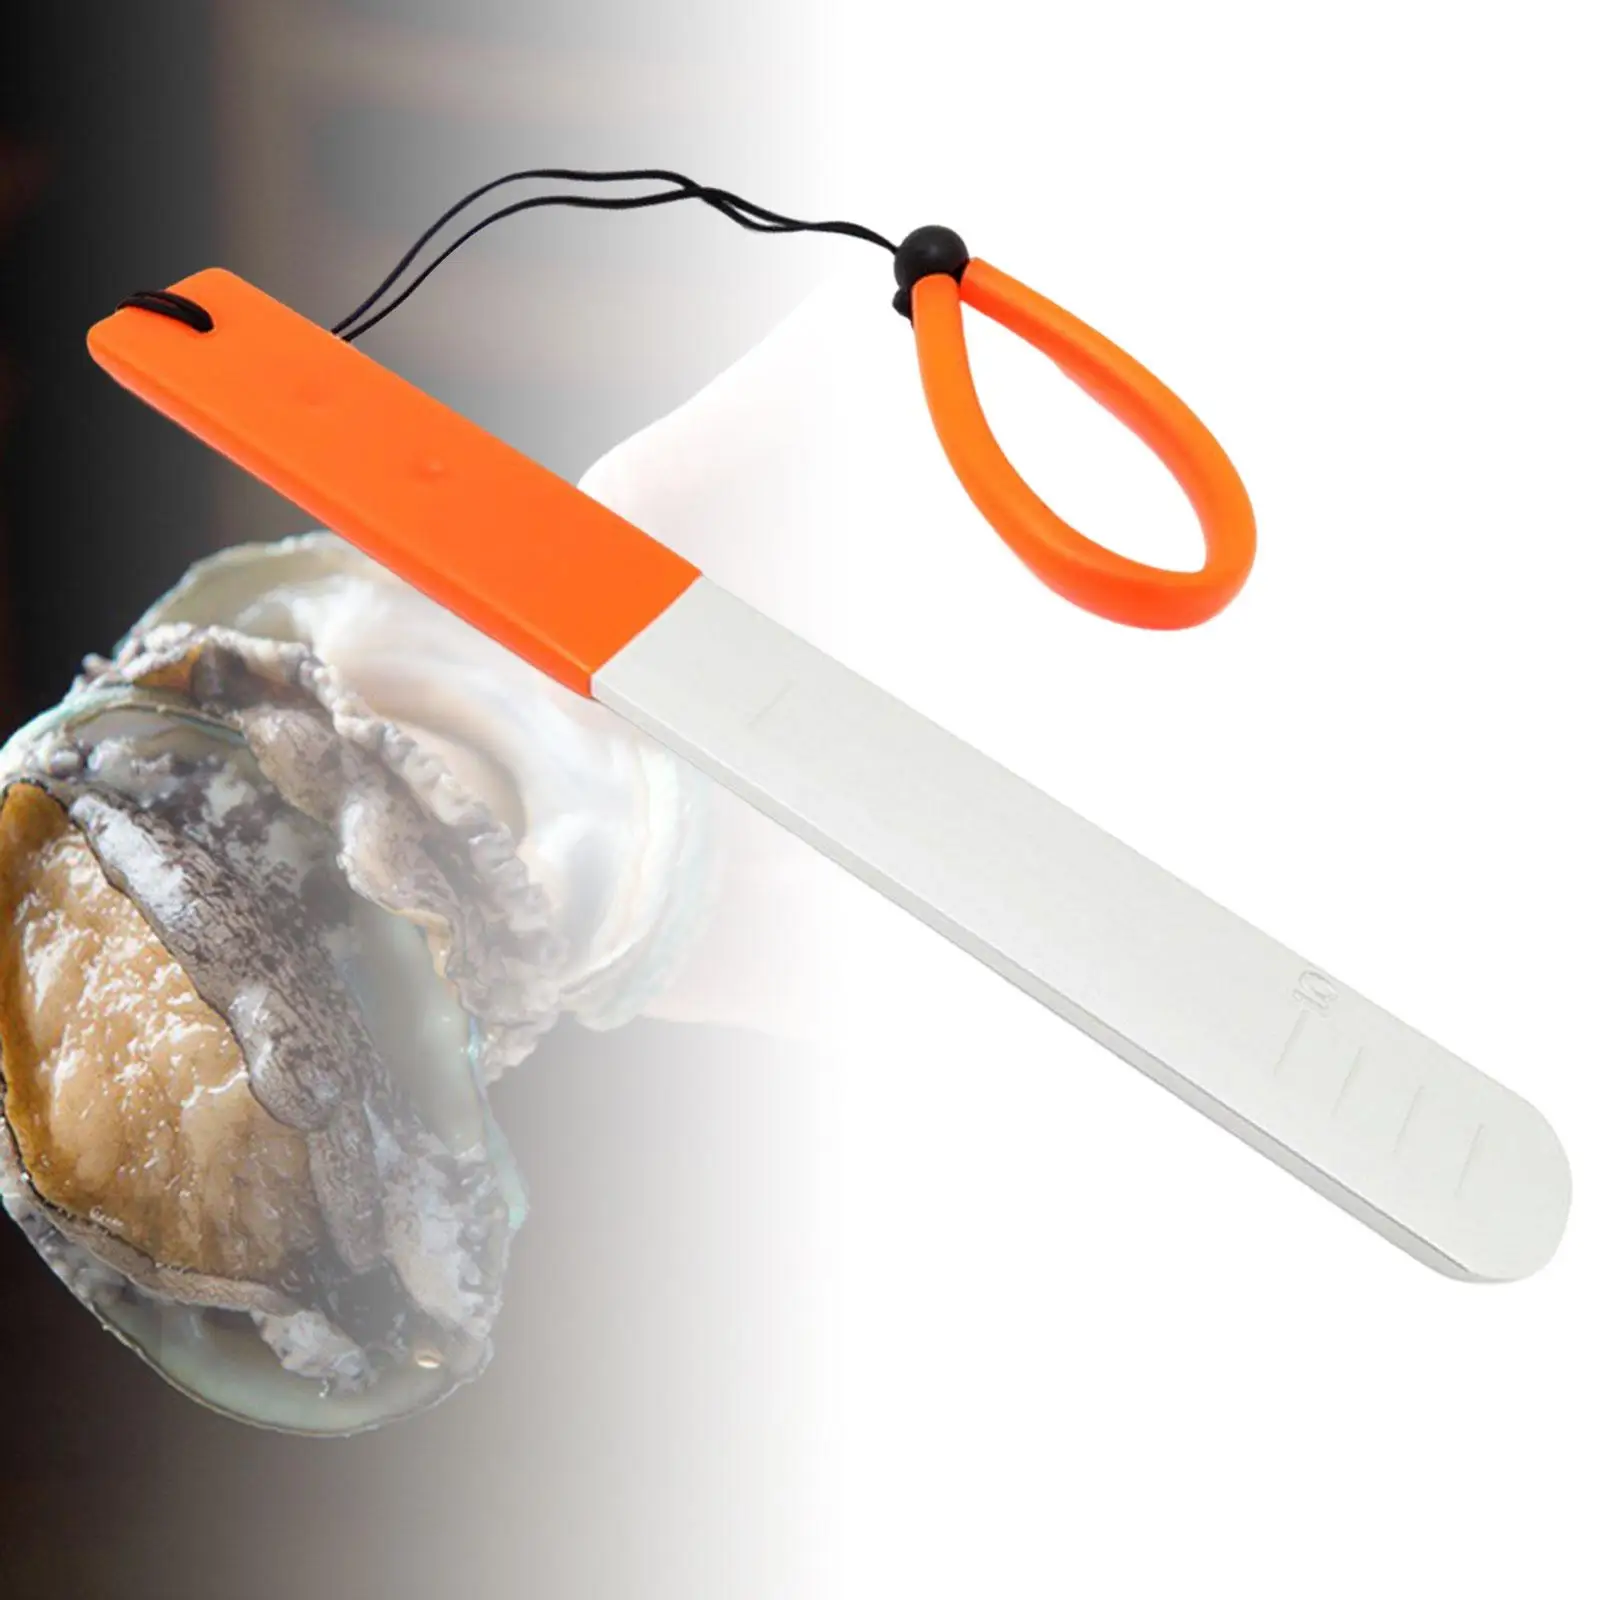 Scuba Diving Abalone Tool Bar with Scale Scallop Ruler Abalone Measuring Ruler for Scuba Diving Gear